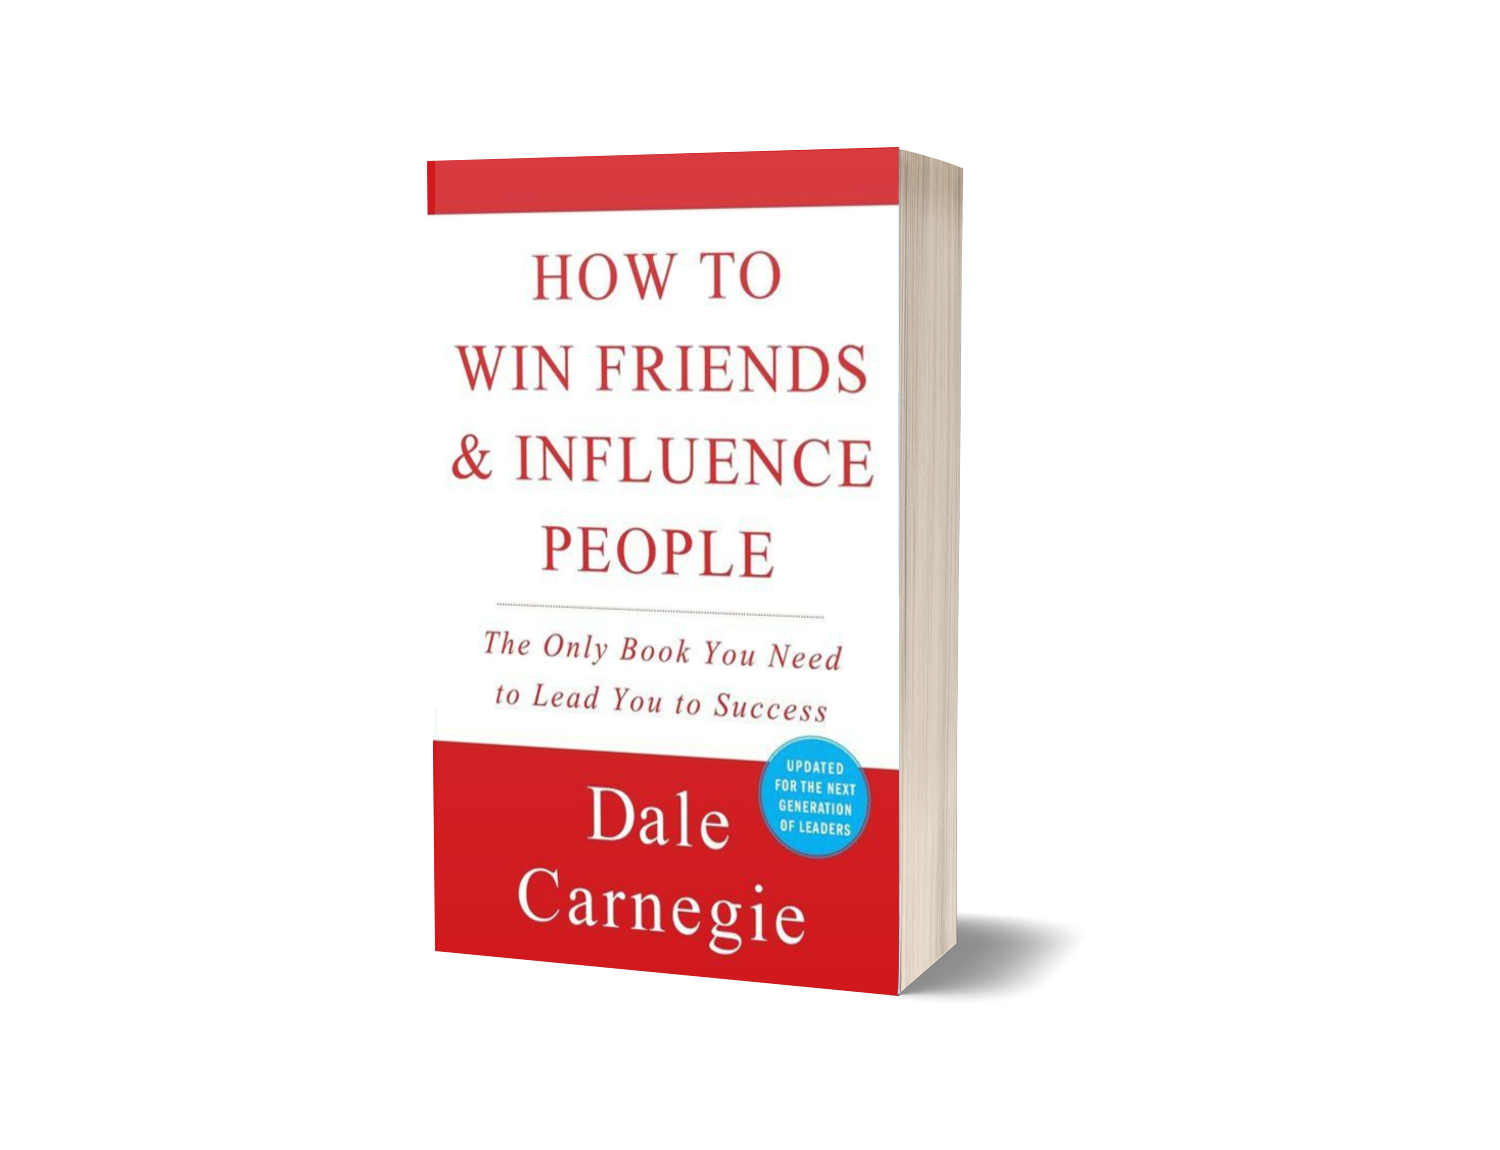 Bookstore　Updated　Pen　by　the　People　Win　Leaders　of　Influence　Press　Next　Carnegie　—　Dale　Friends　Generation　How　Honey　For　to　and　—